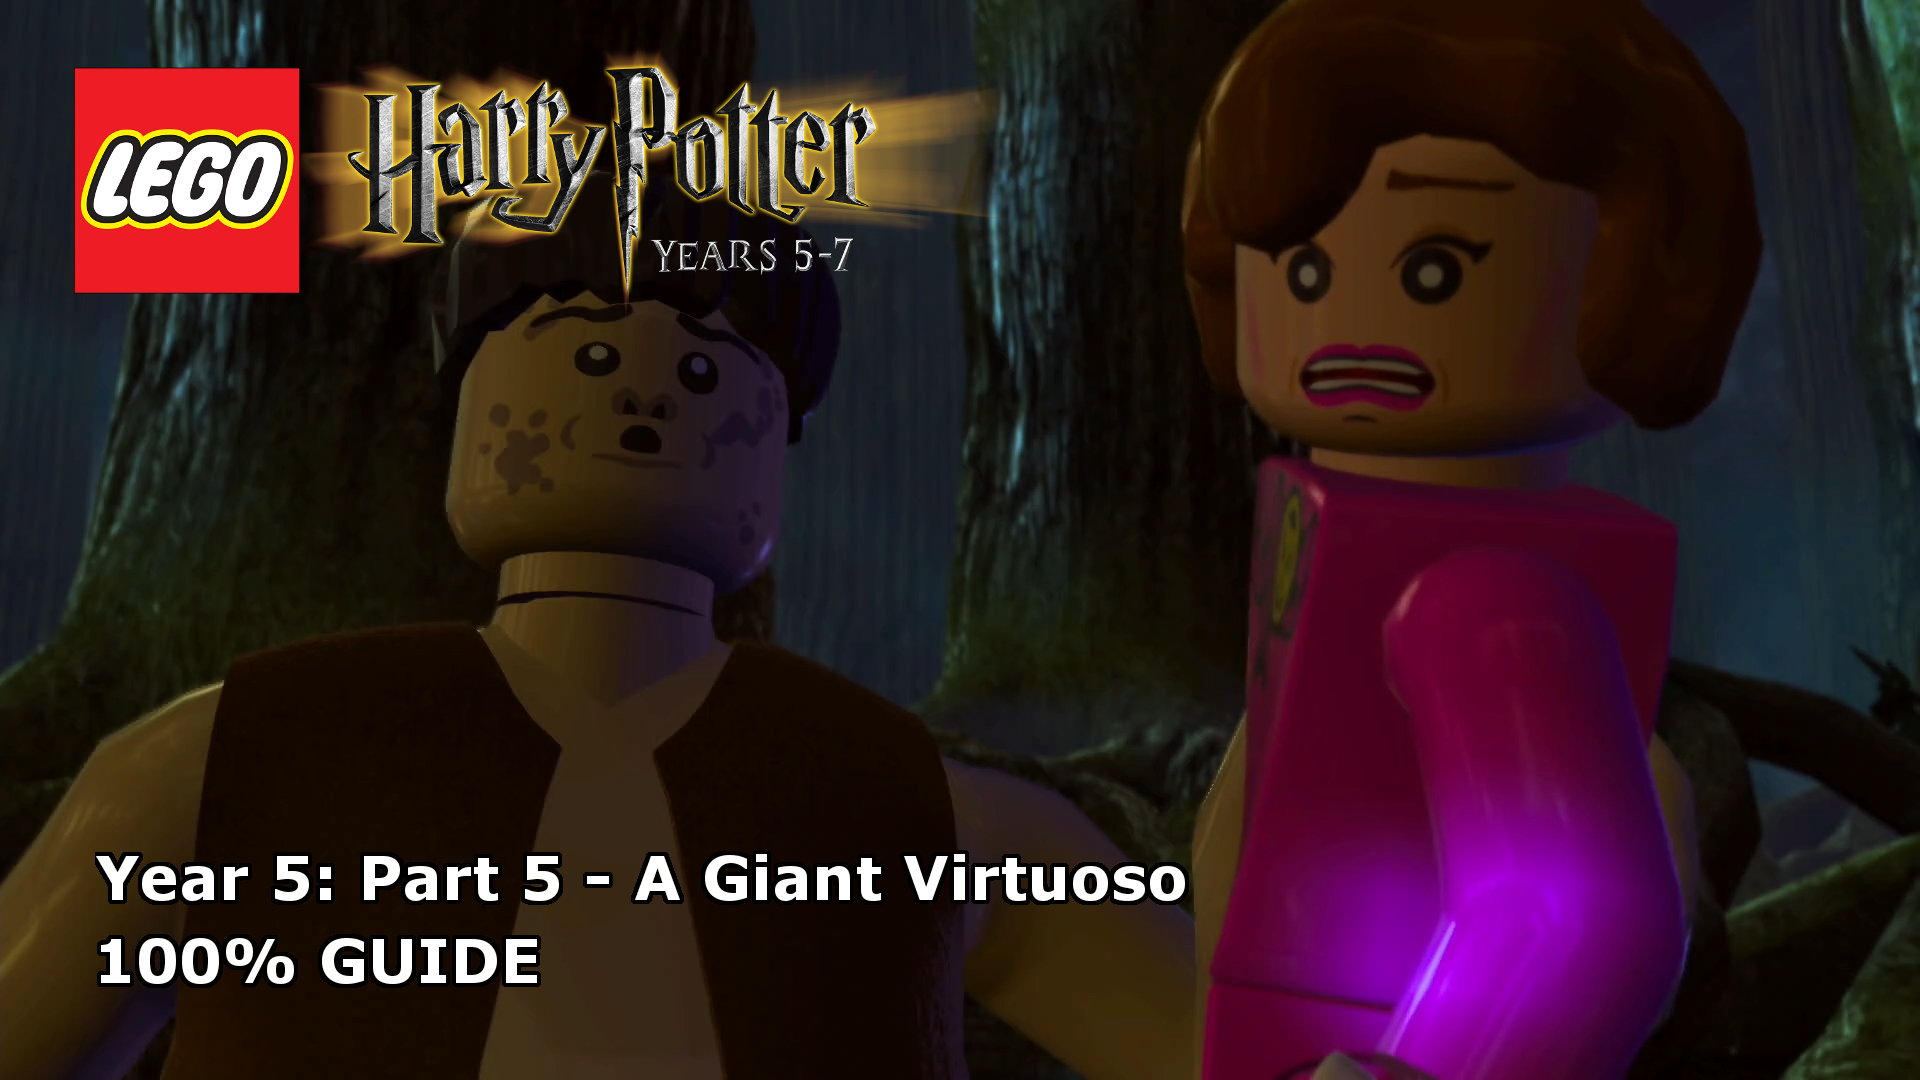 Lego Harry Potter: Years 5-7 – Dark Times 100% Guide